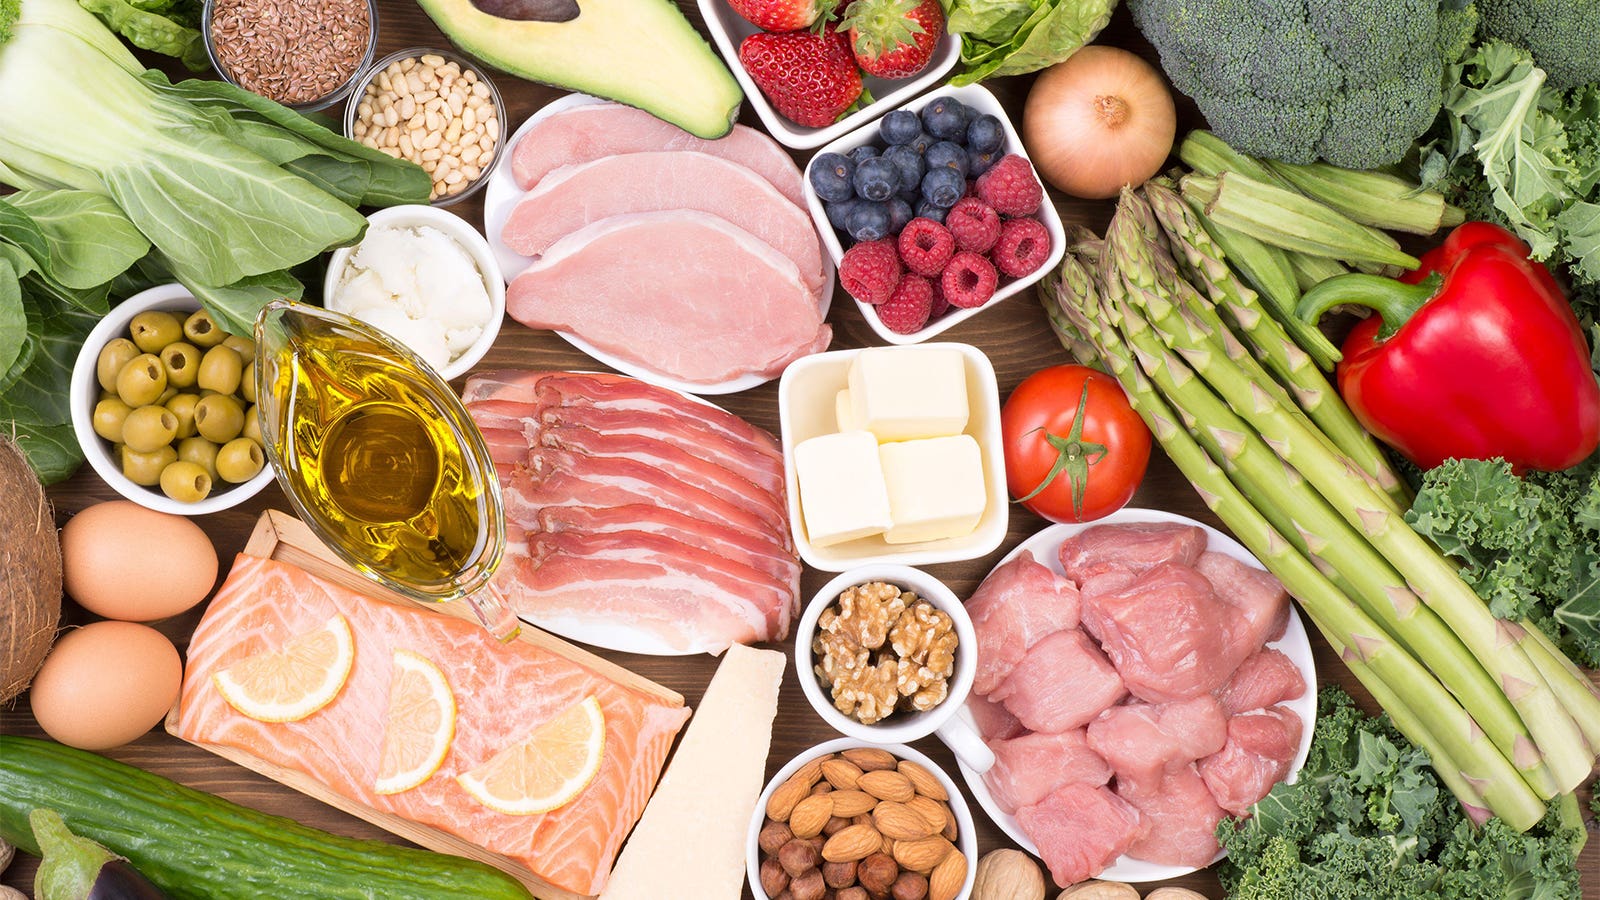 A photo of foods associated with the ketogenic diet